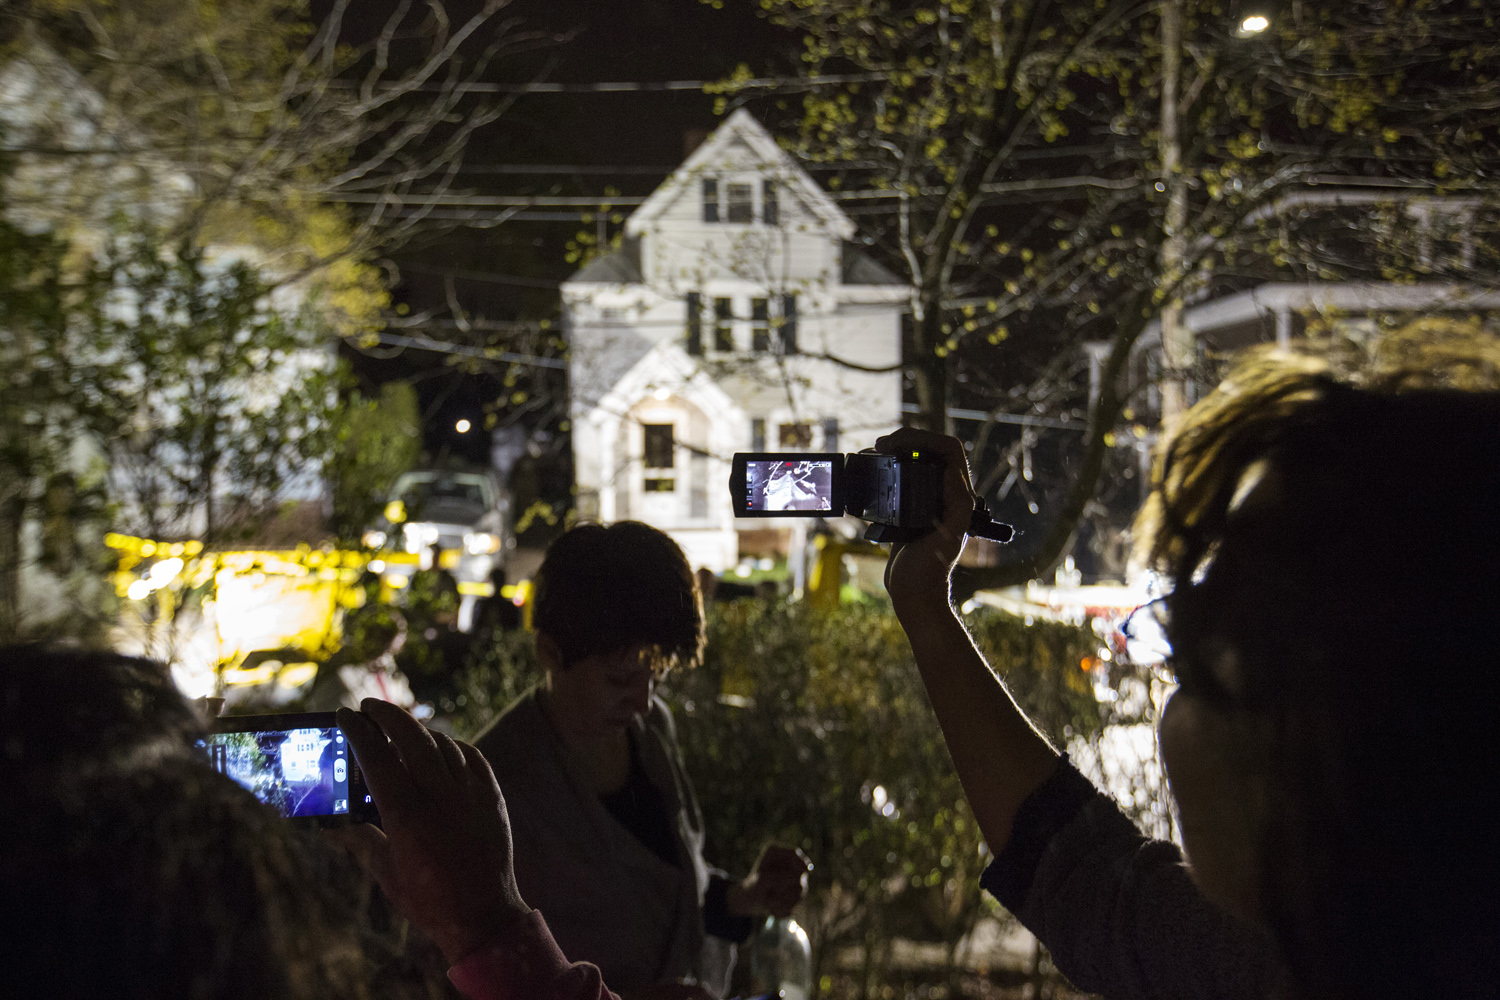 April 19, 2013. Neighbors use cameras to record images of the boat at 67 Franklin St. where Dzhokhar Tsarnaev, the surviving suspect in the Boston Marathon bombings, was hiding,  before being taken into custody by police, in Watertown, Massachusetts